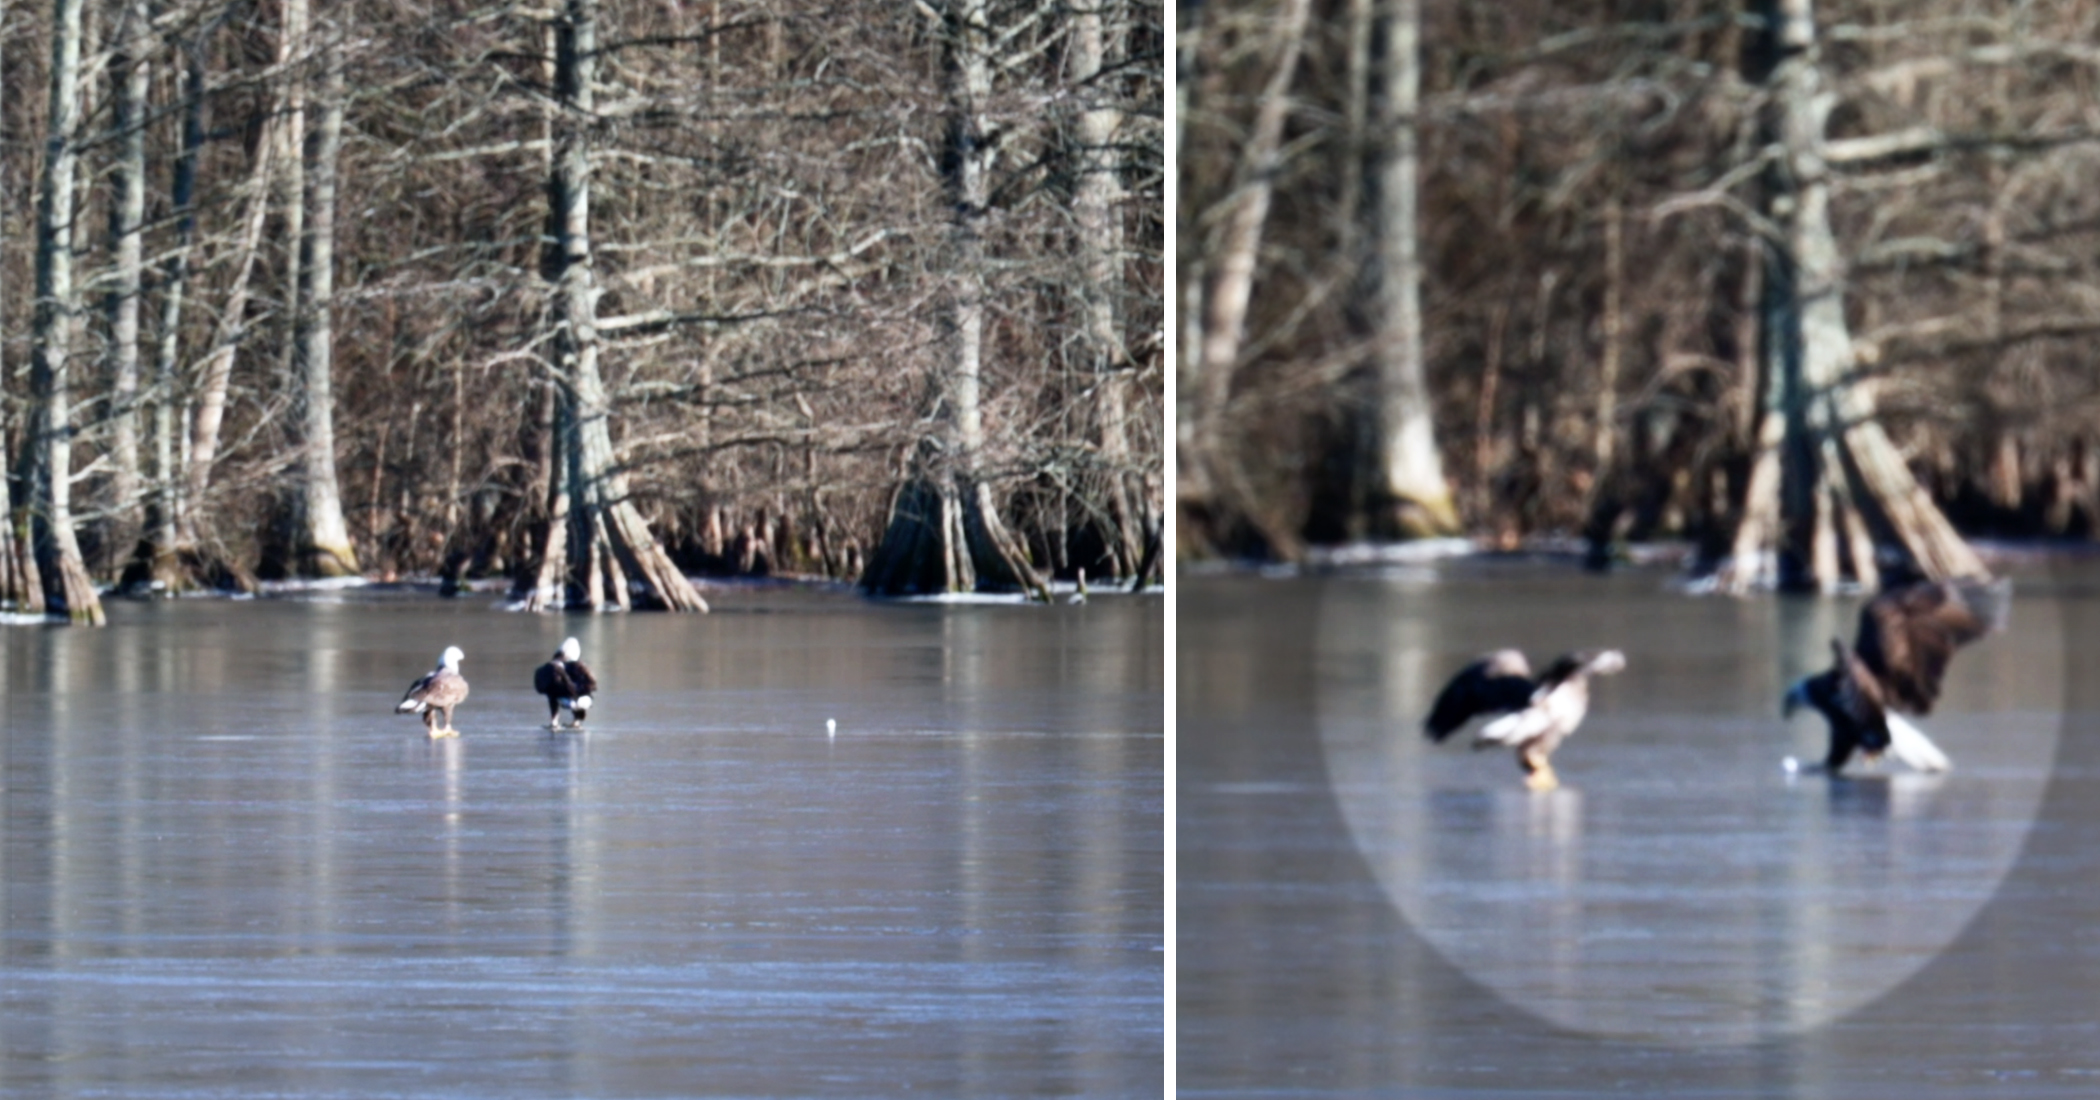 NextImg:Video: Photographer captures bald eagle playing with a golf ball on a frozen lake